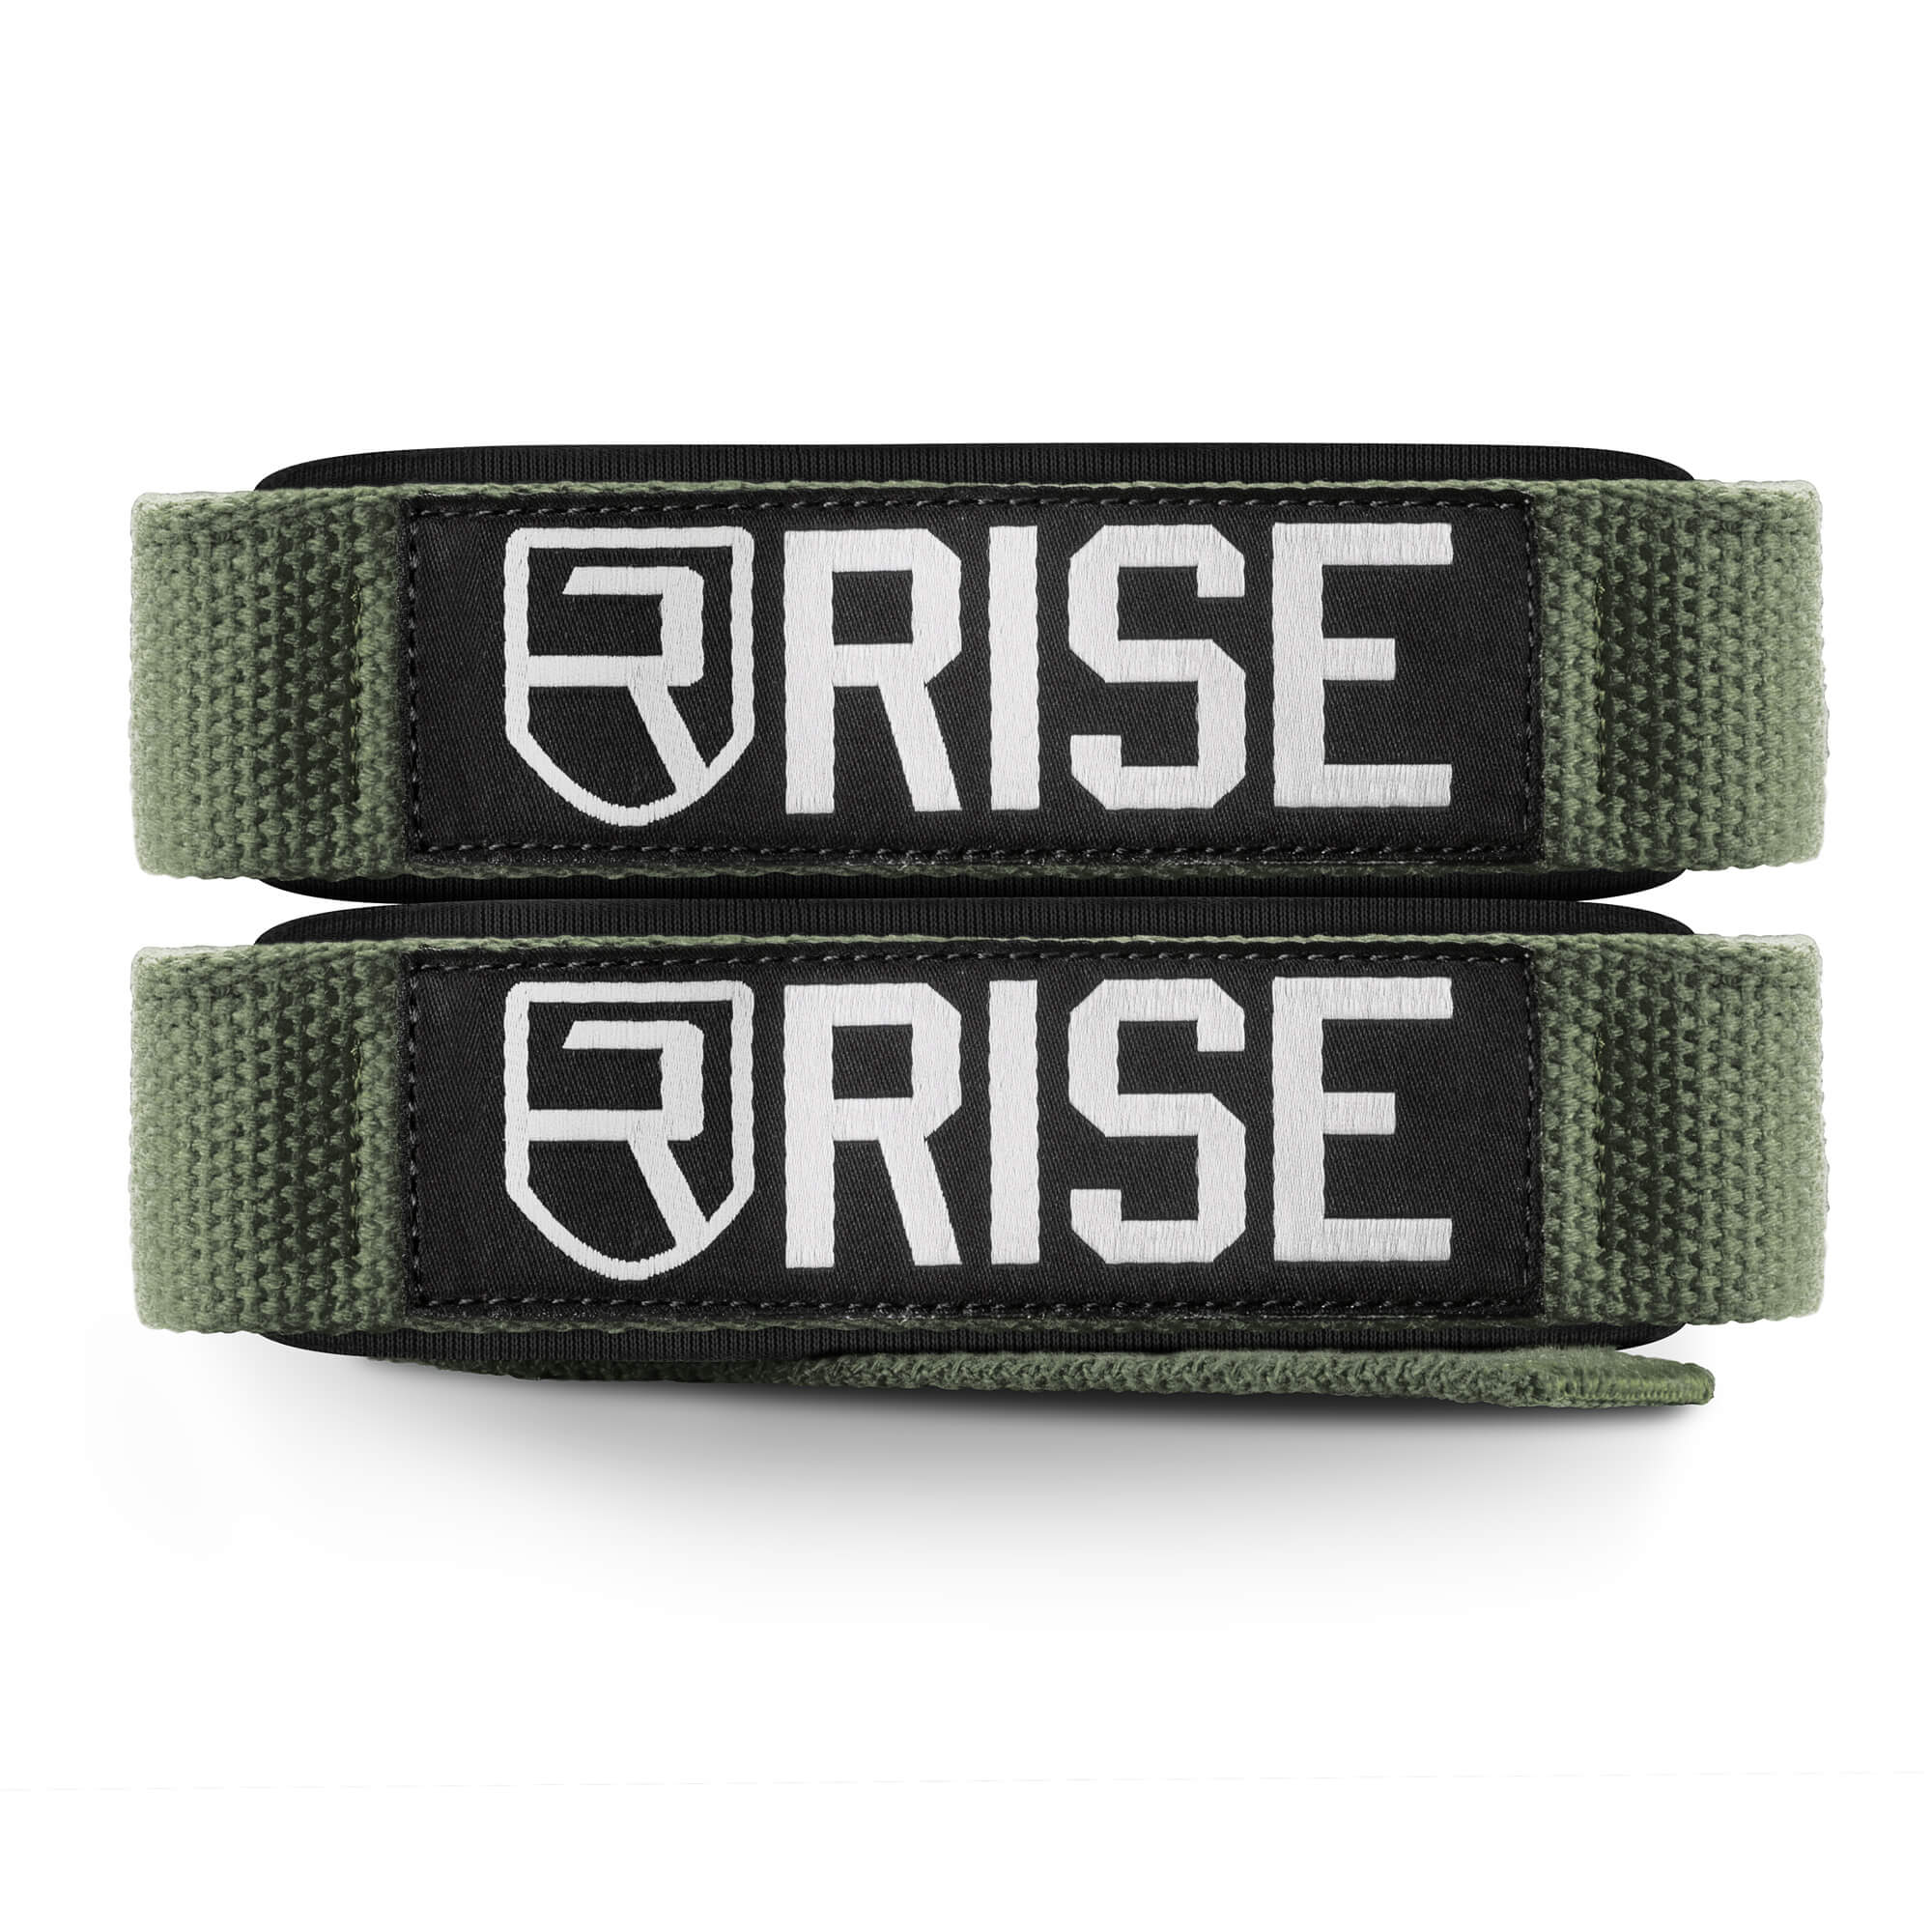 Lifting Straps - Army Green